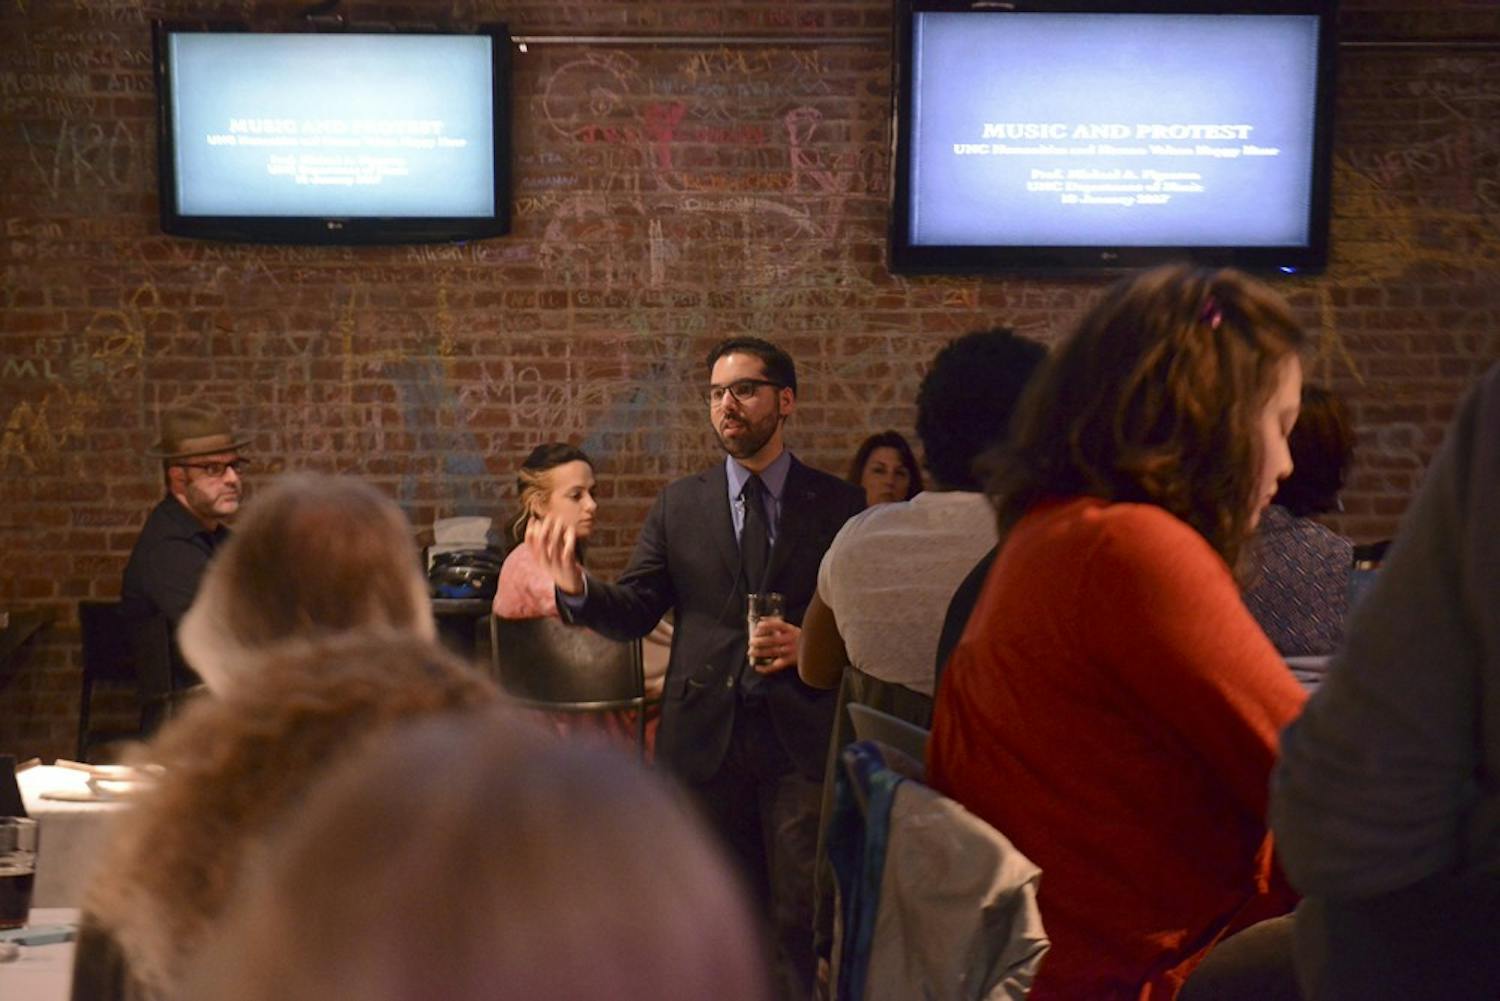 Michael Figueroa, an ethnomusicologist, gives a speech at the Humanities Happy Hour: Protest Music event on Wednesday night at Top of the Hill.